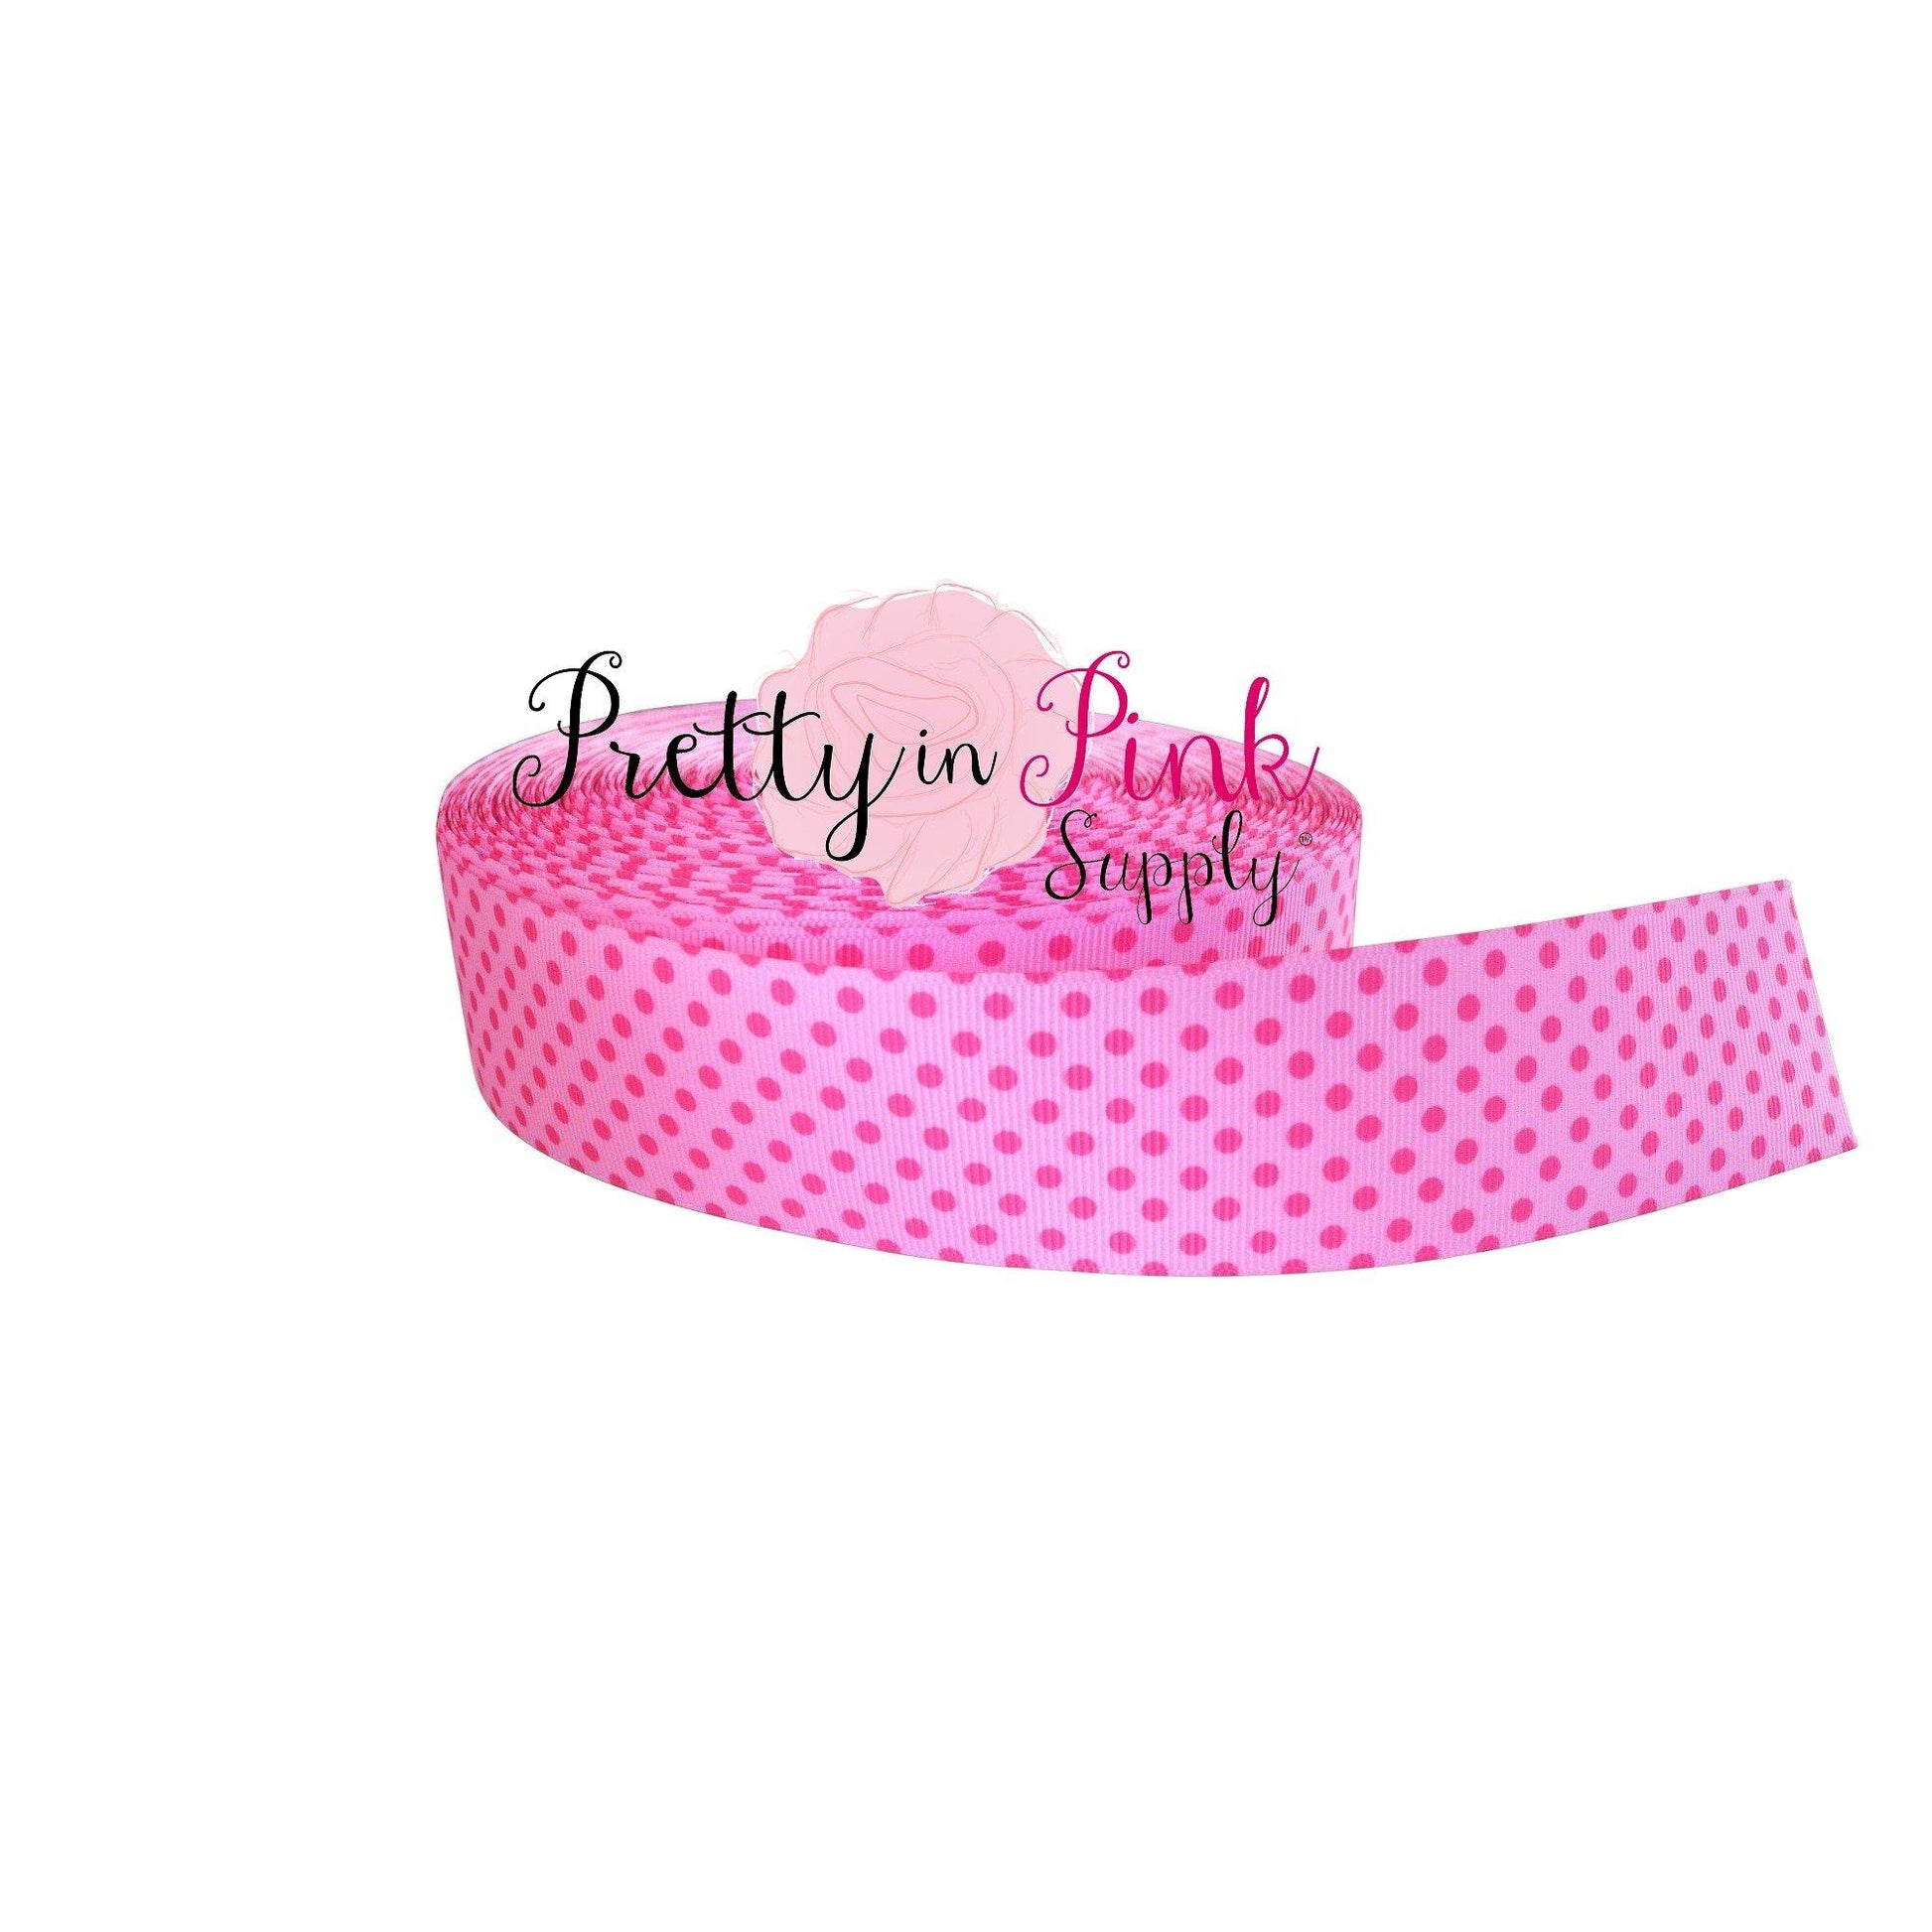 1.5" Pink/Hot Pink Dot Grosgrain Ribbon - Pretty in Pink Supply